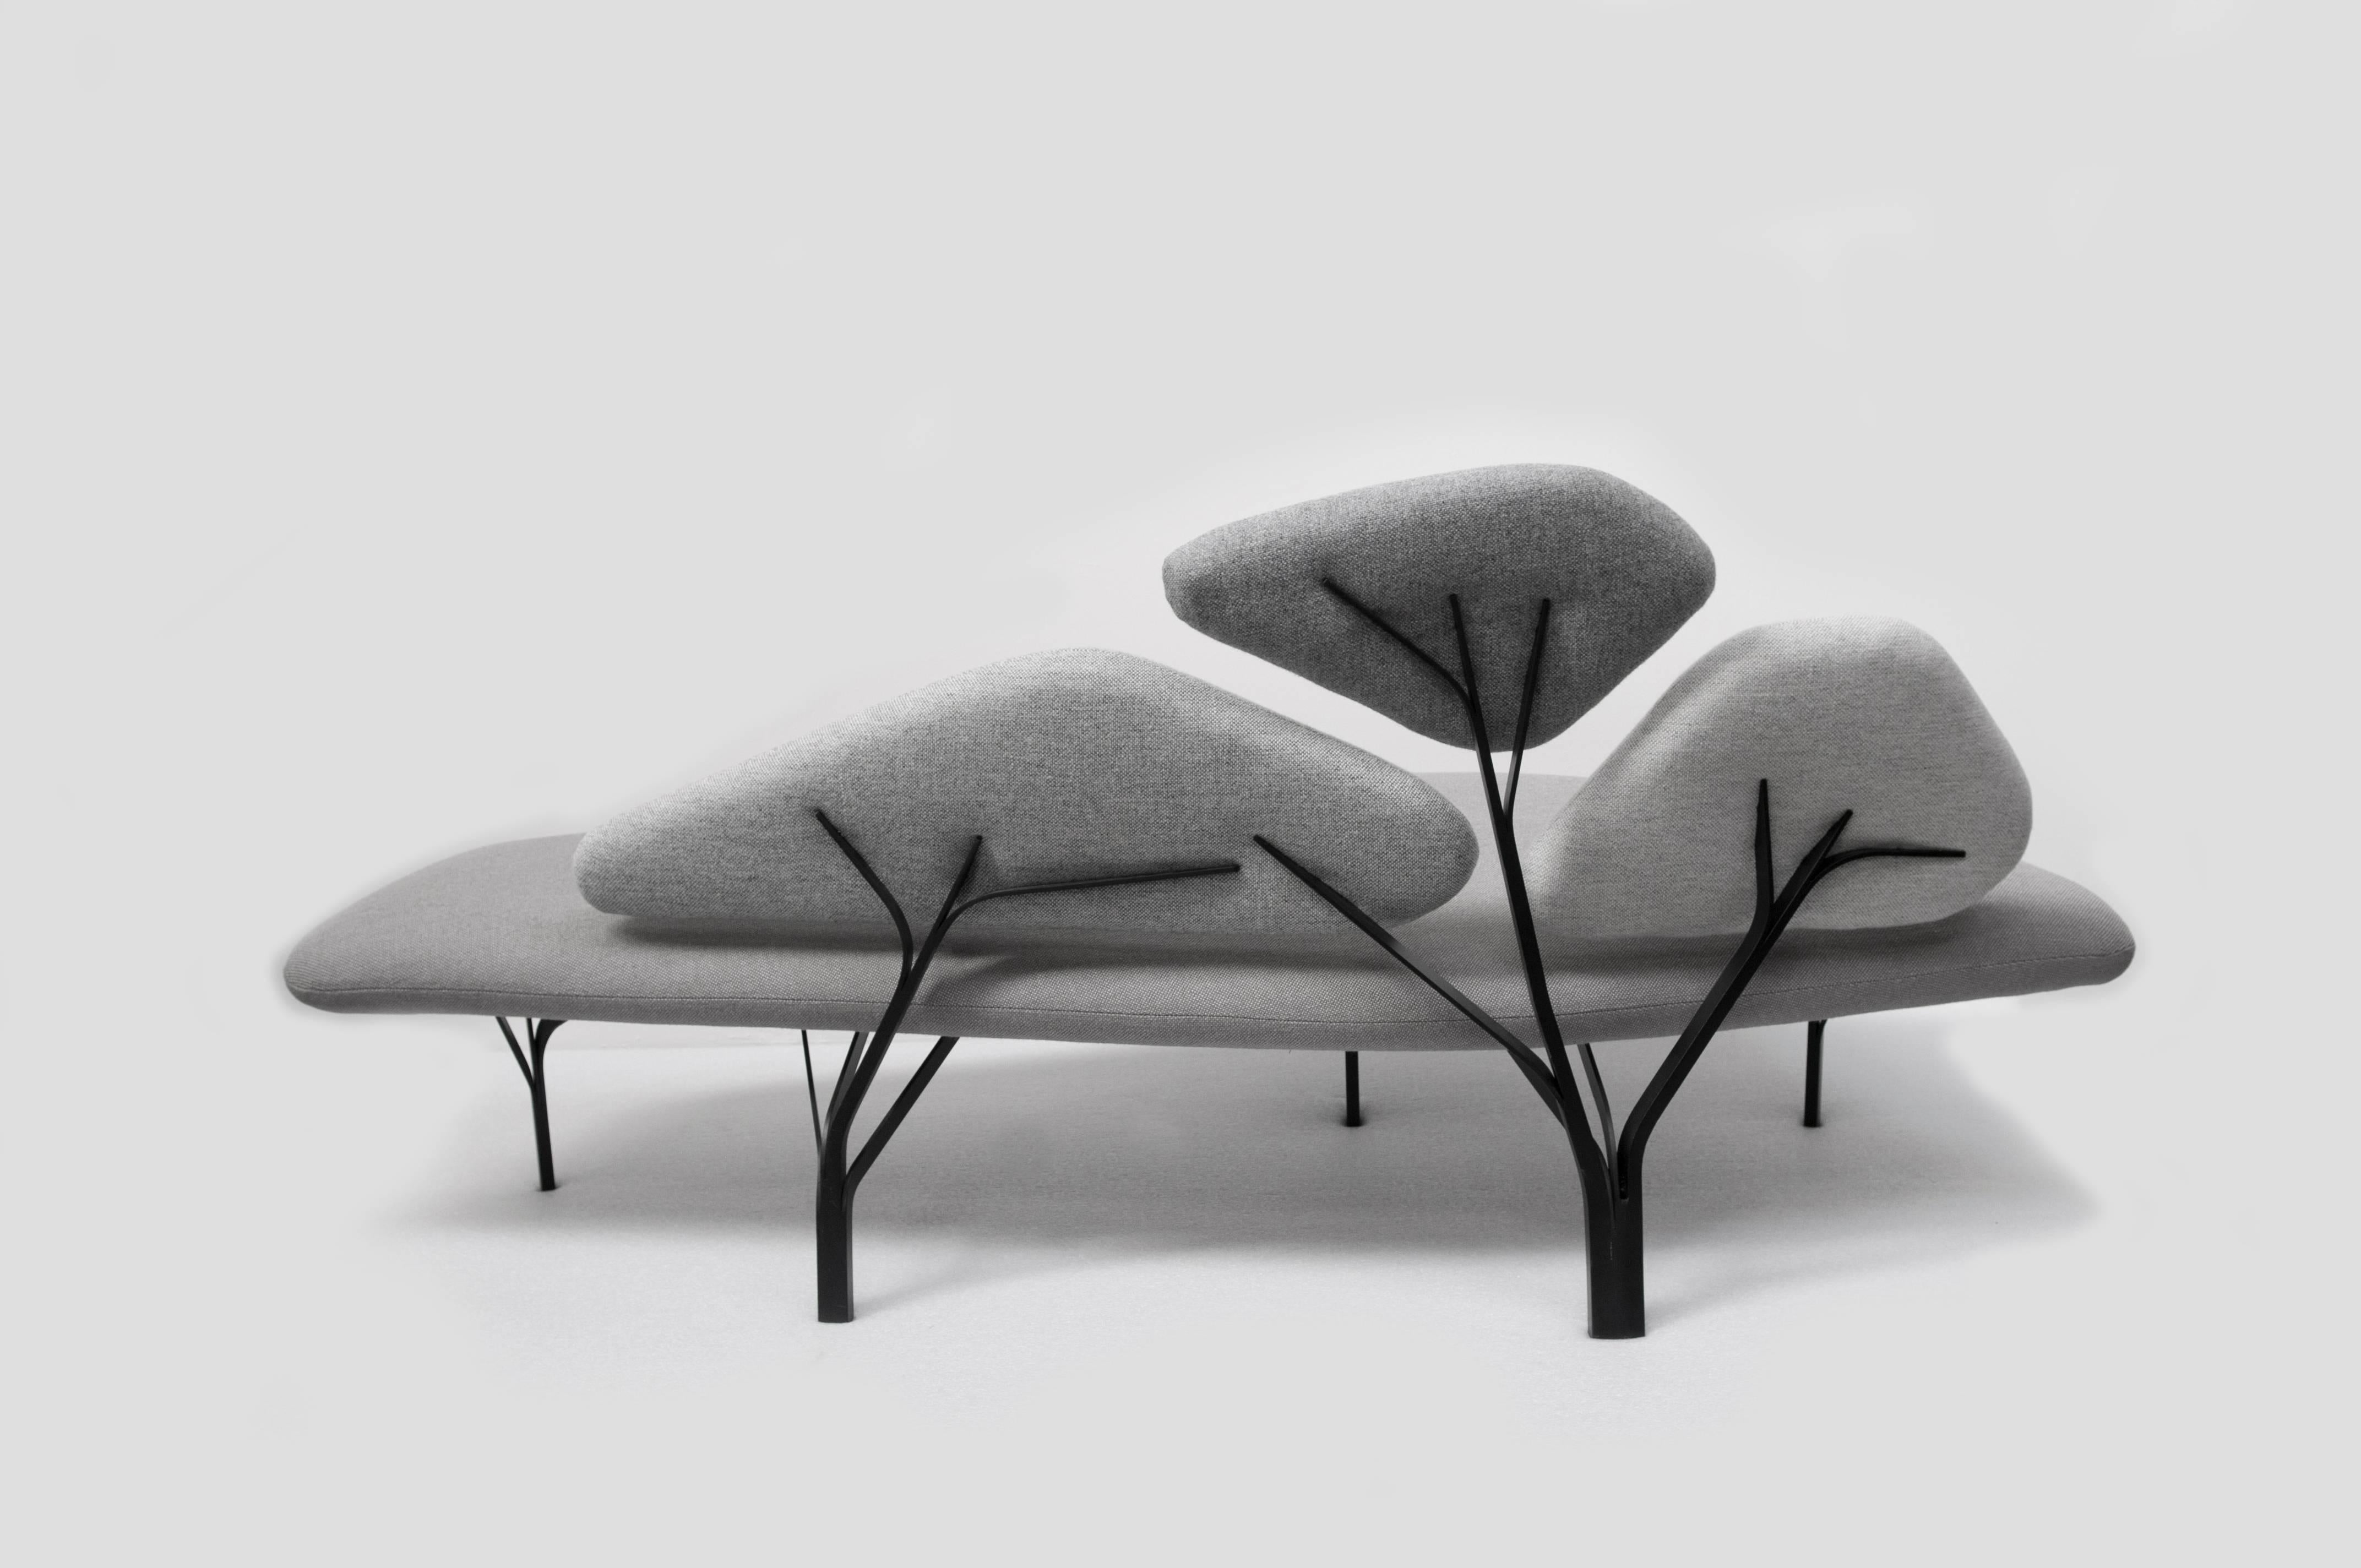 Borghese is a light sofa inspired by the stone pines of the Villa Borghese gardens in Roma. The metal structure reproduces the network of branches and supports the back cushions; the whole draws a comfortable landscape.

Color scale: Borghese is